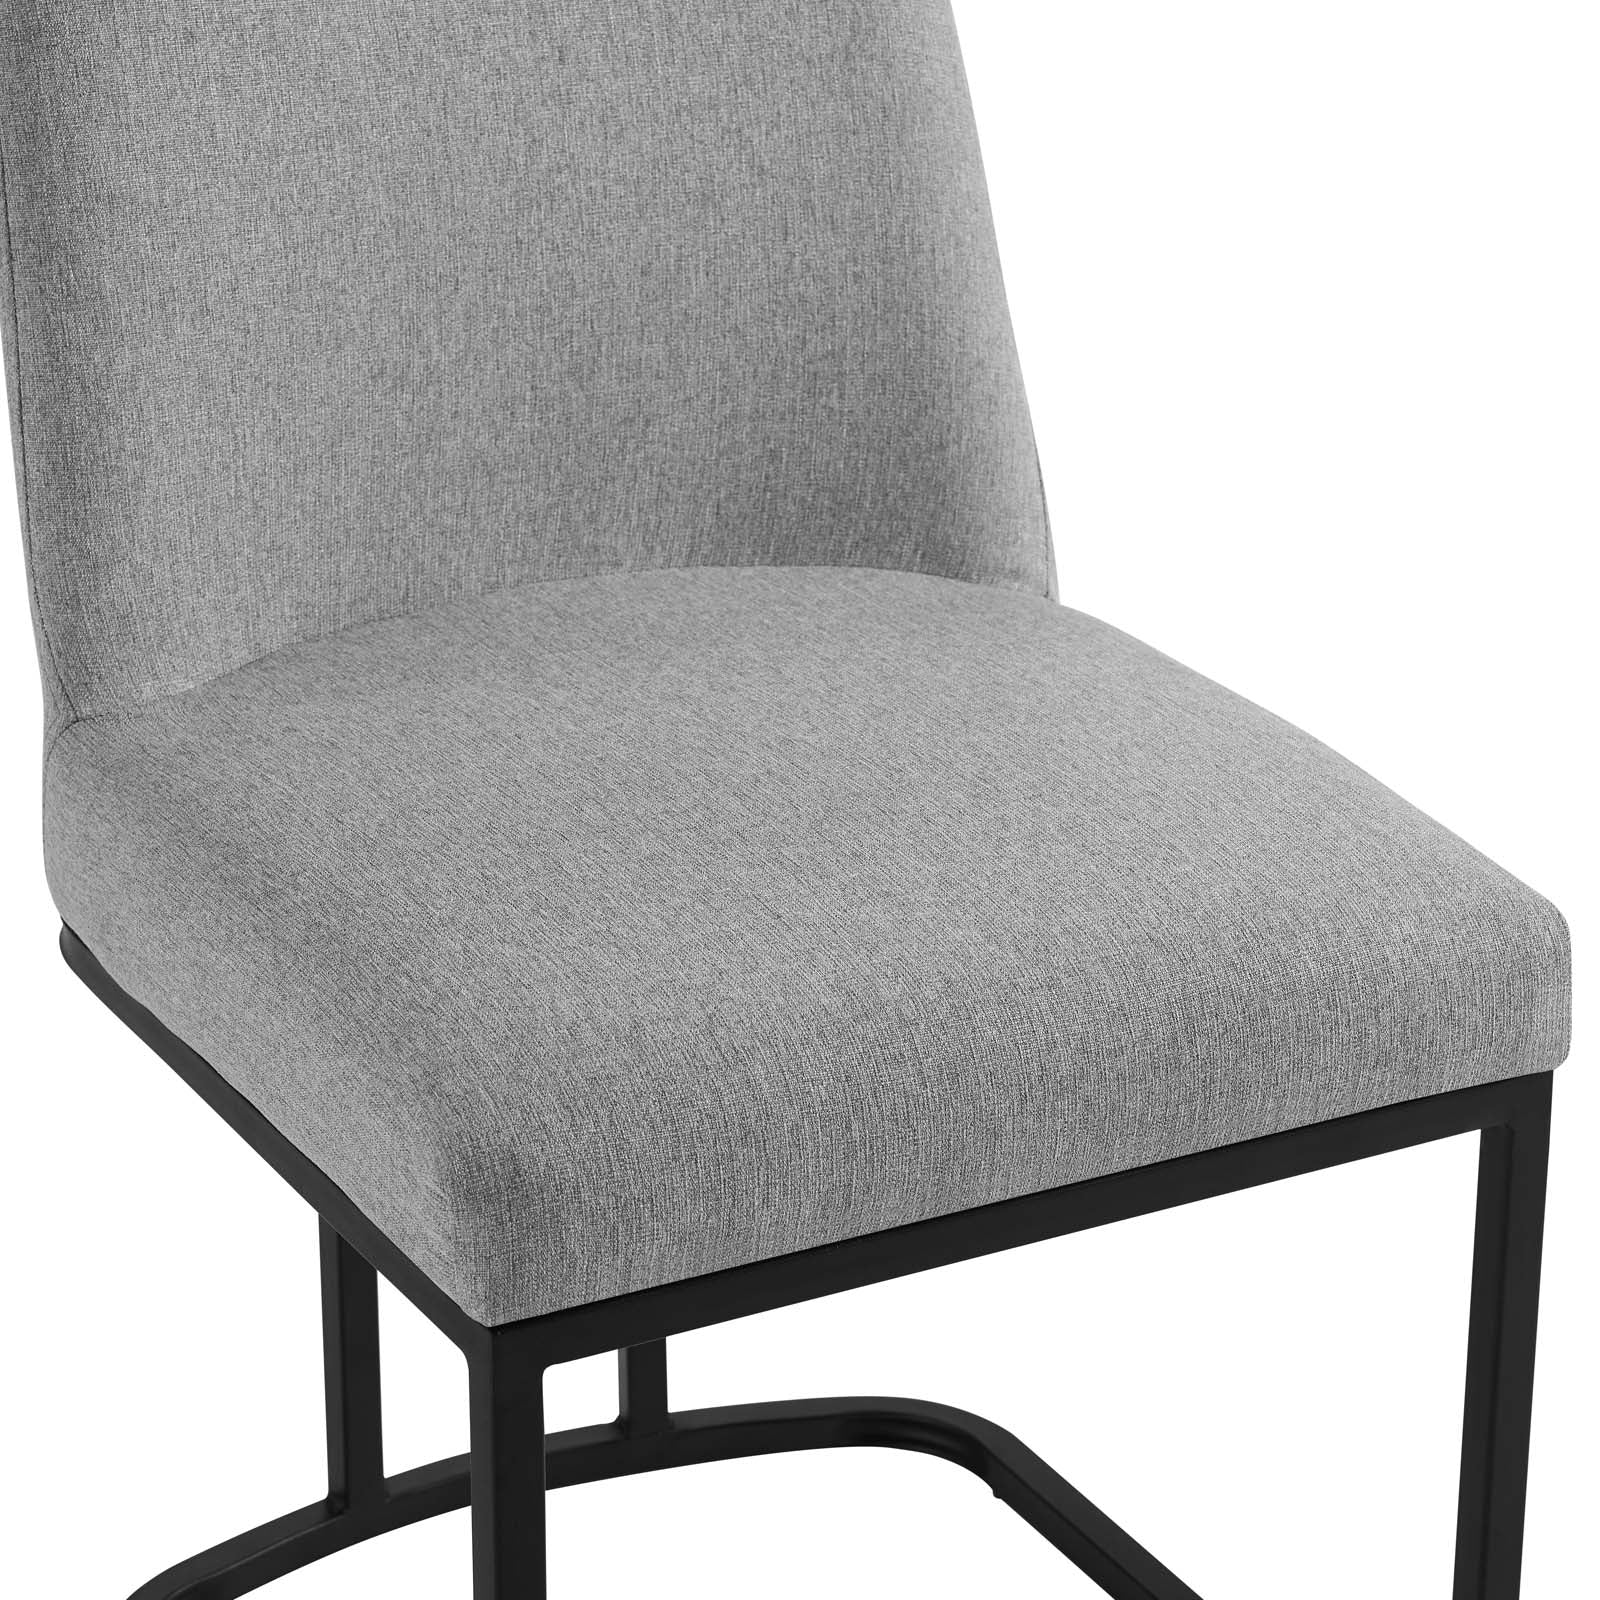 Modway Dining Chairs - Amplify Sled Base Upholstered Fabric Dining Side Chair Black Light Gray